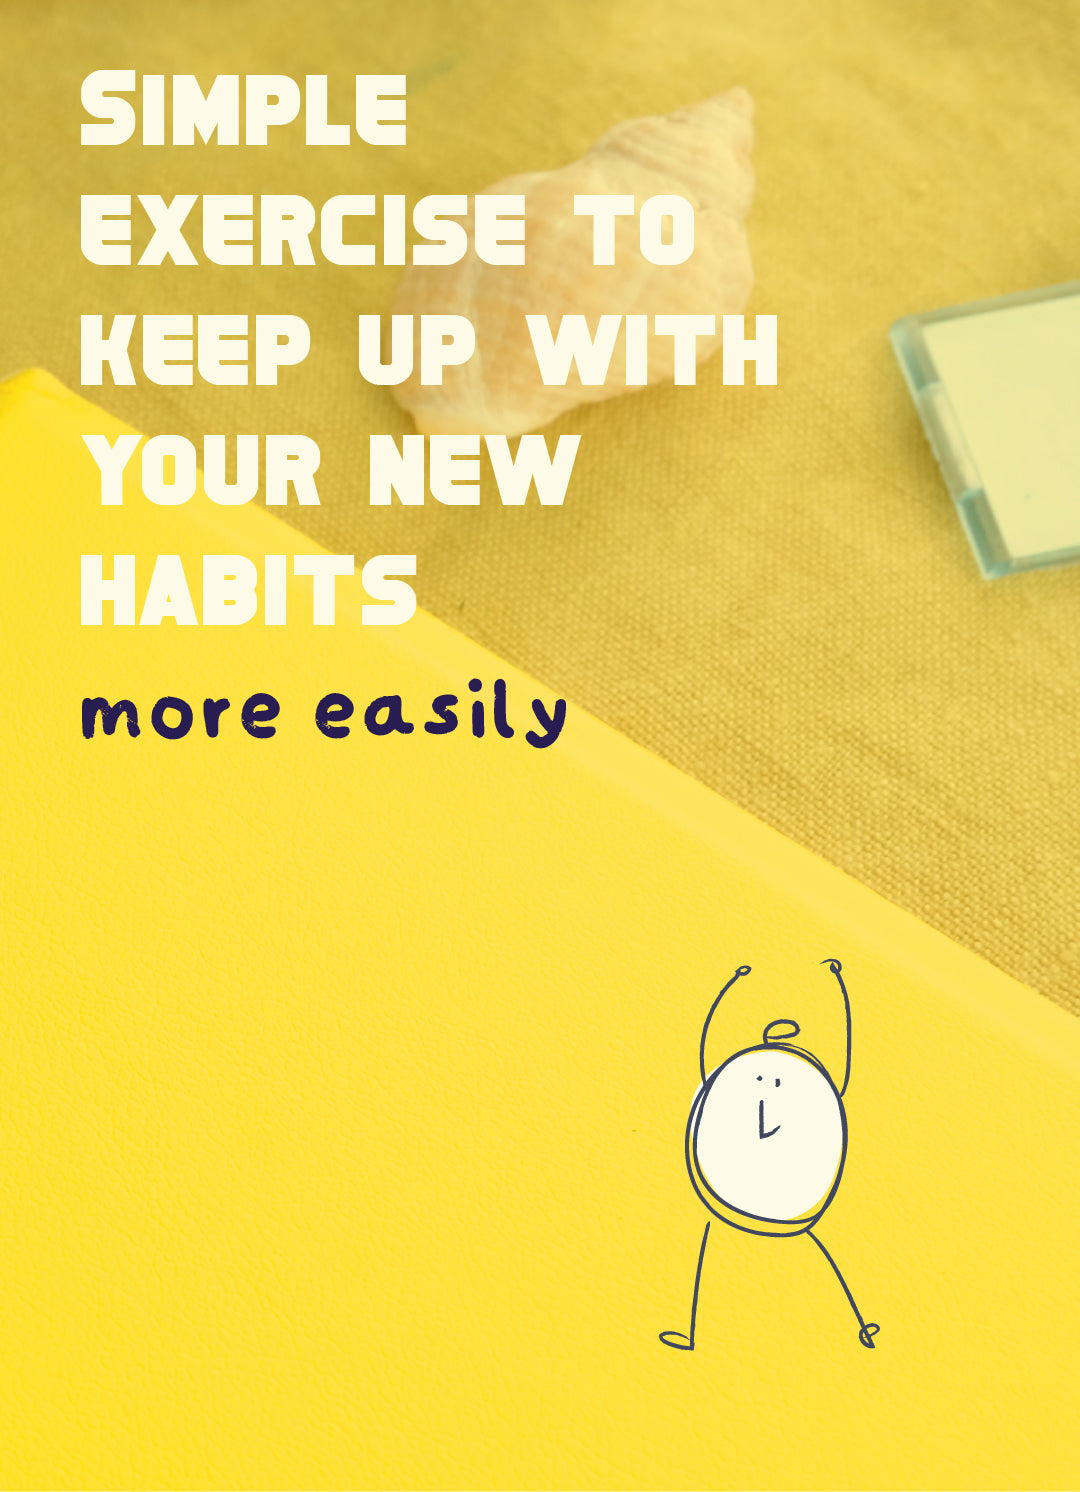 Simple exercise to keep up with your new habits more easily